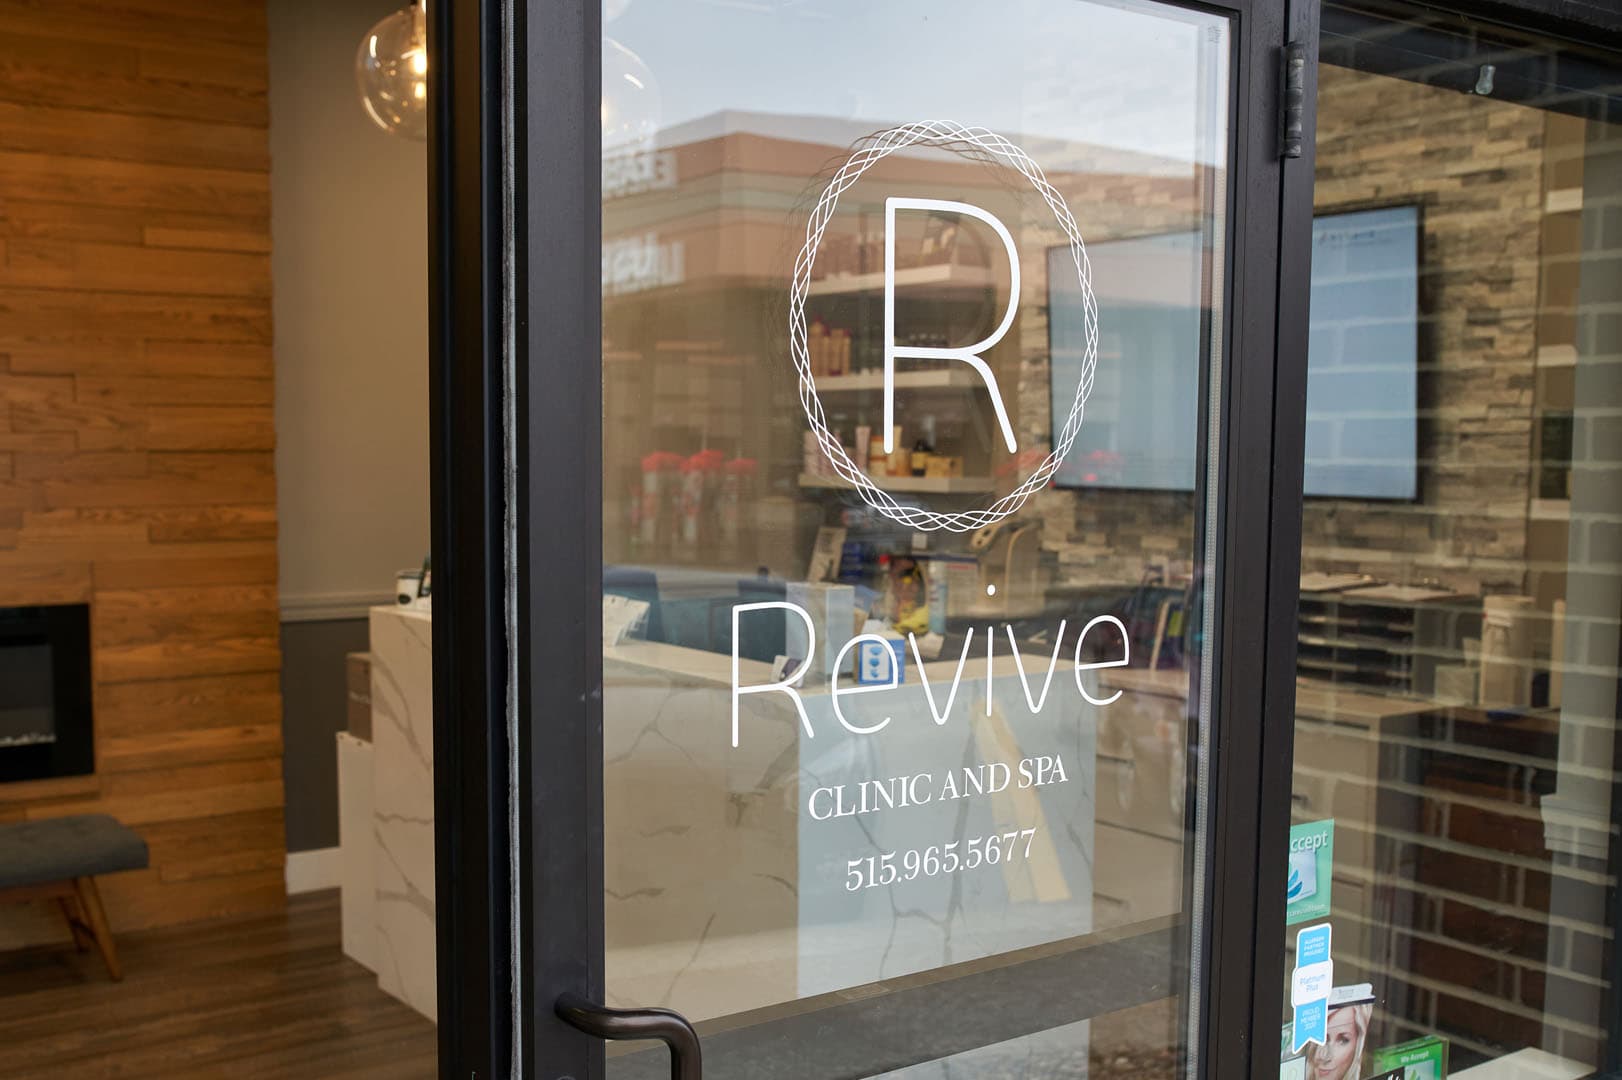 Location photo of Revive Dermatology Clinic and Spa